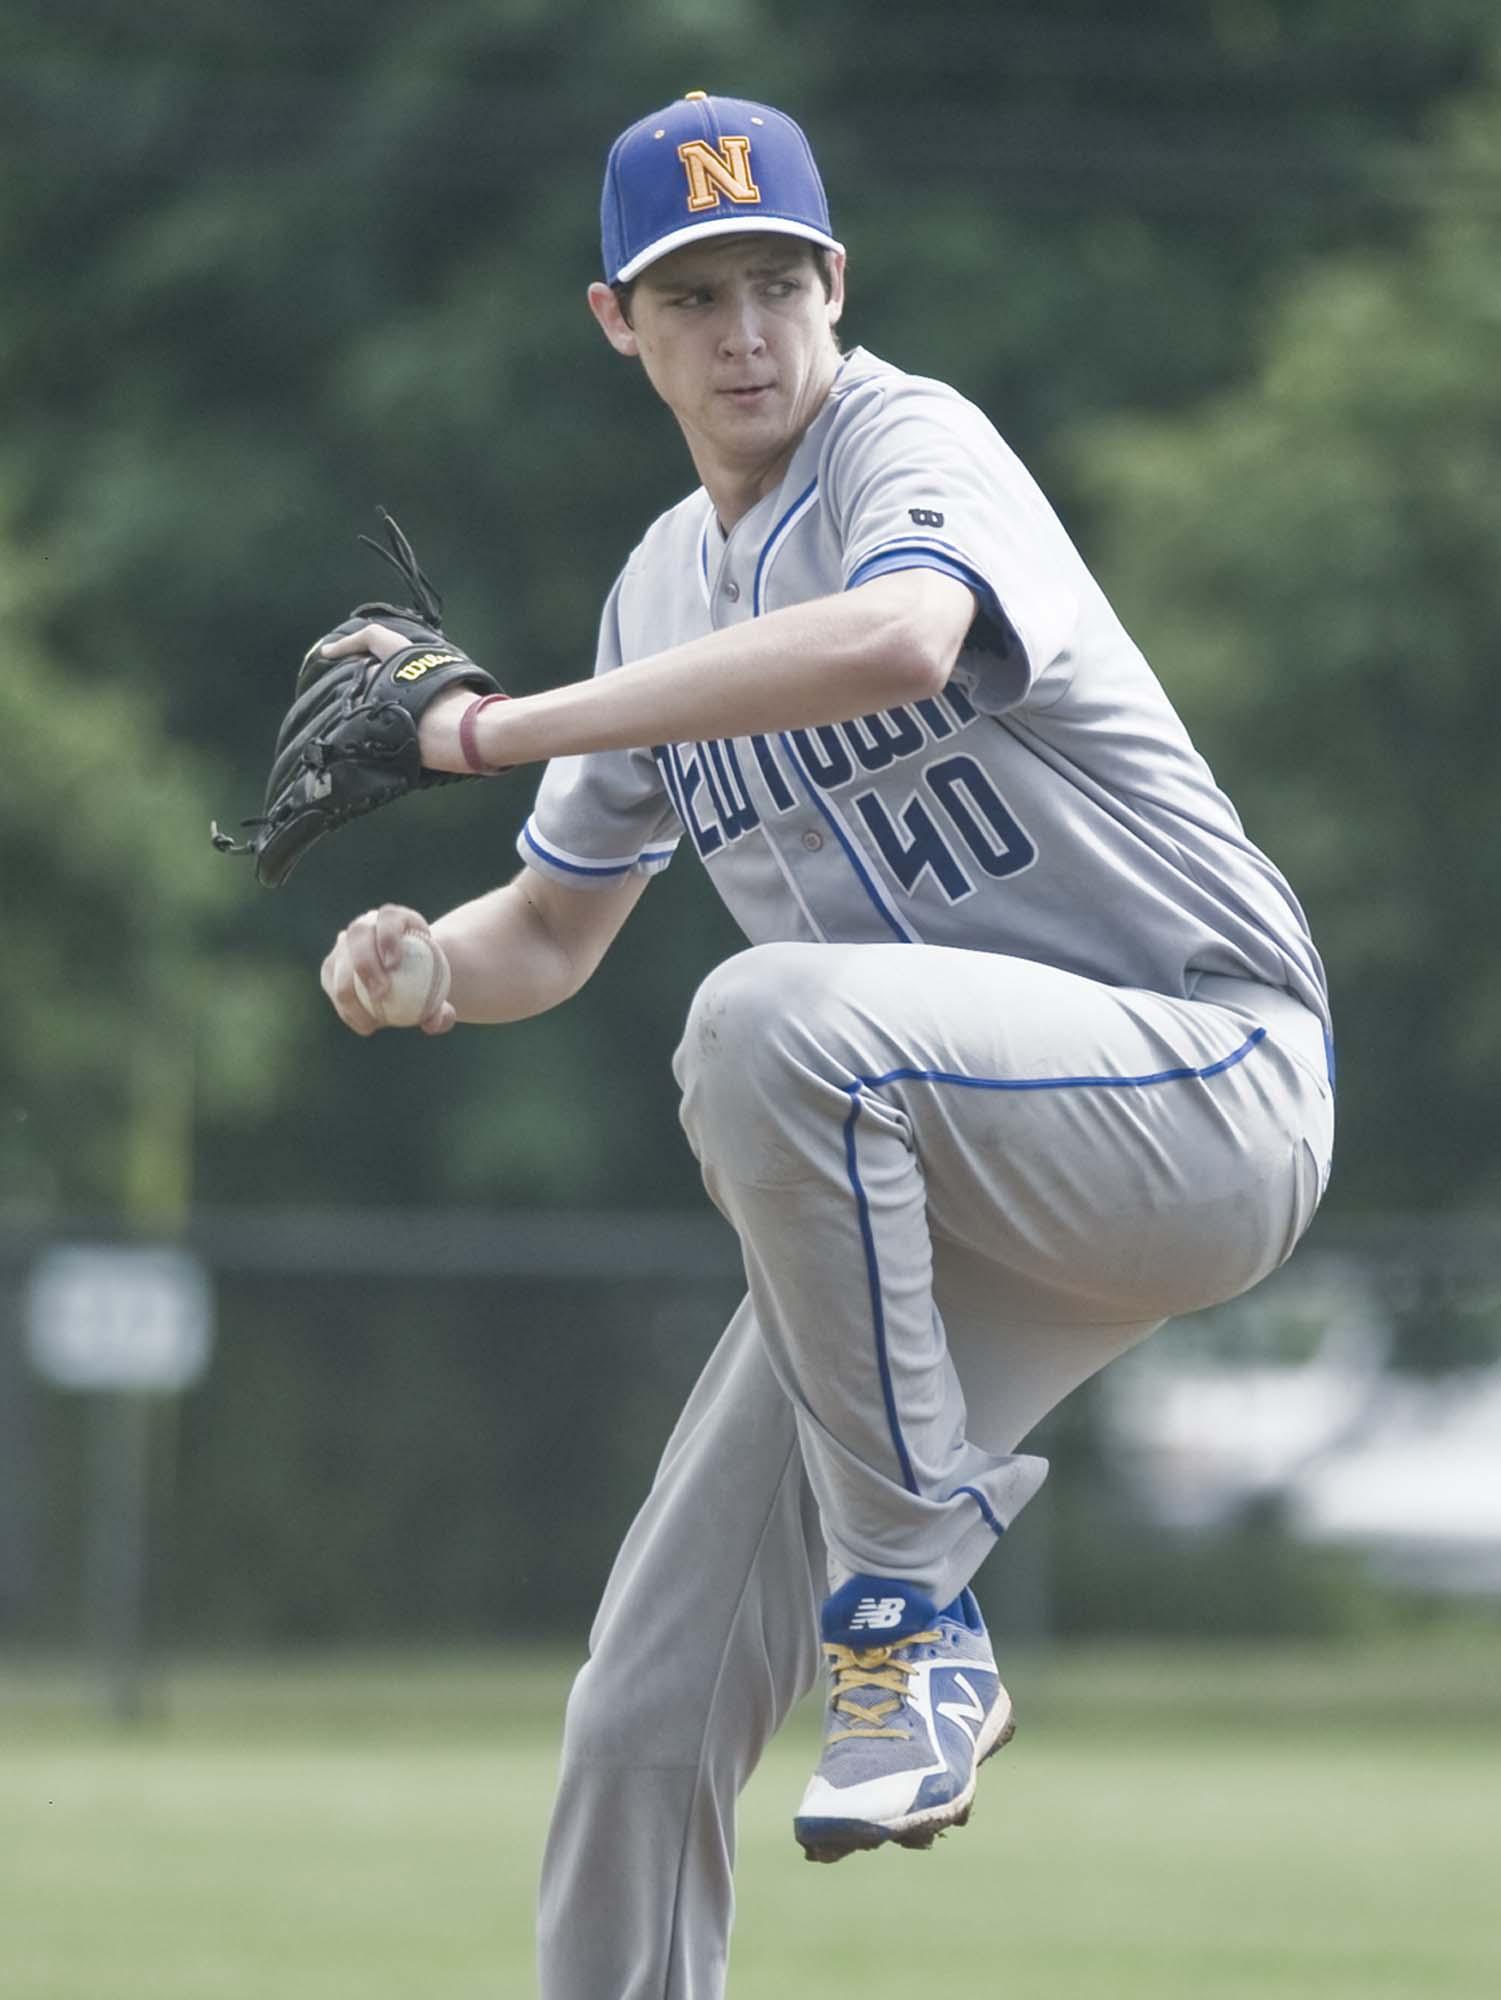 Baseball: DeLuca fires one-hitter to lift Ridgefield to Class LL semis